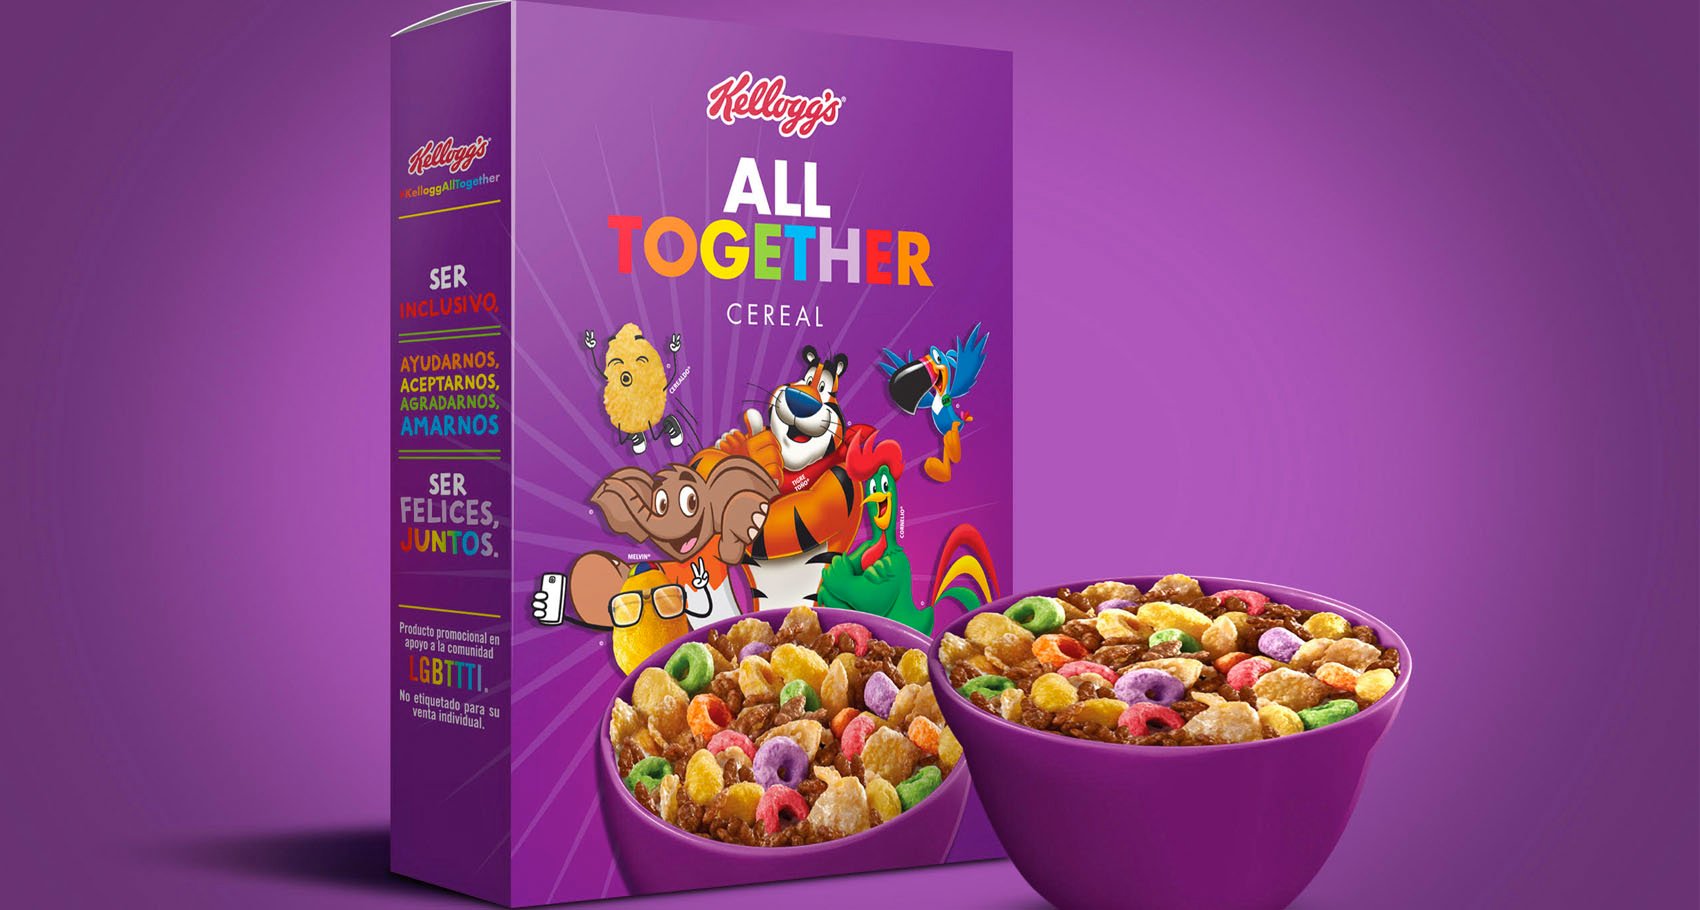 Kelloggs Introduces “all Together Cereal” For Lgbtq Campaign